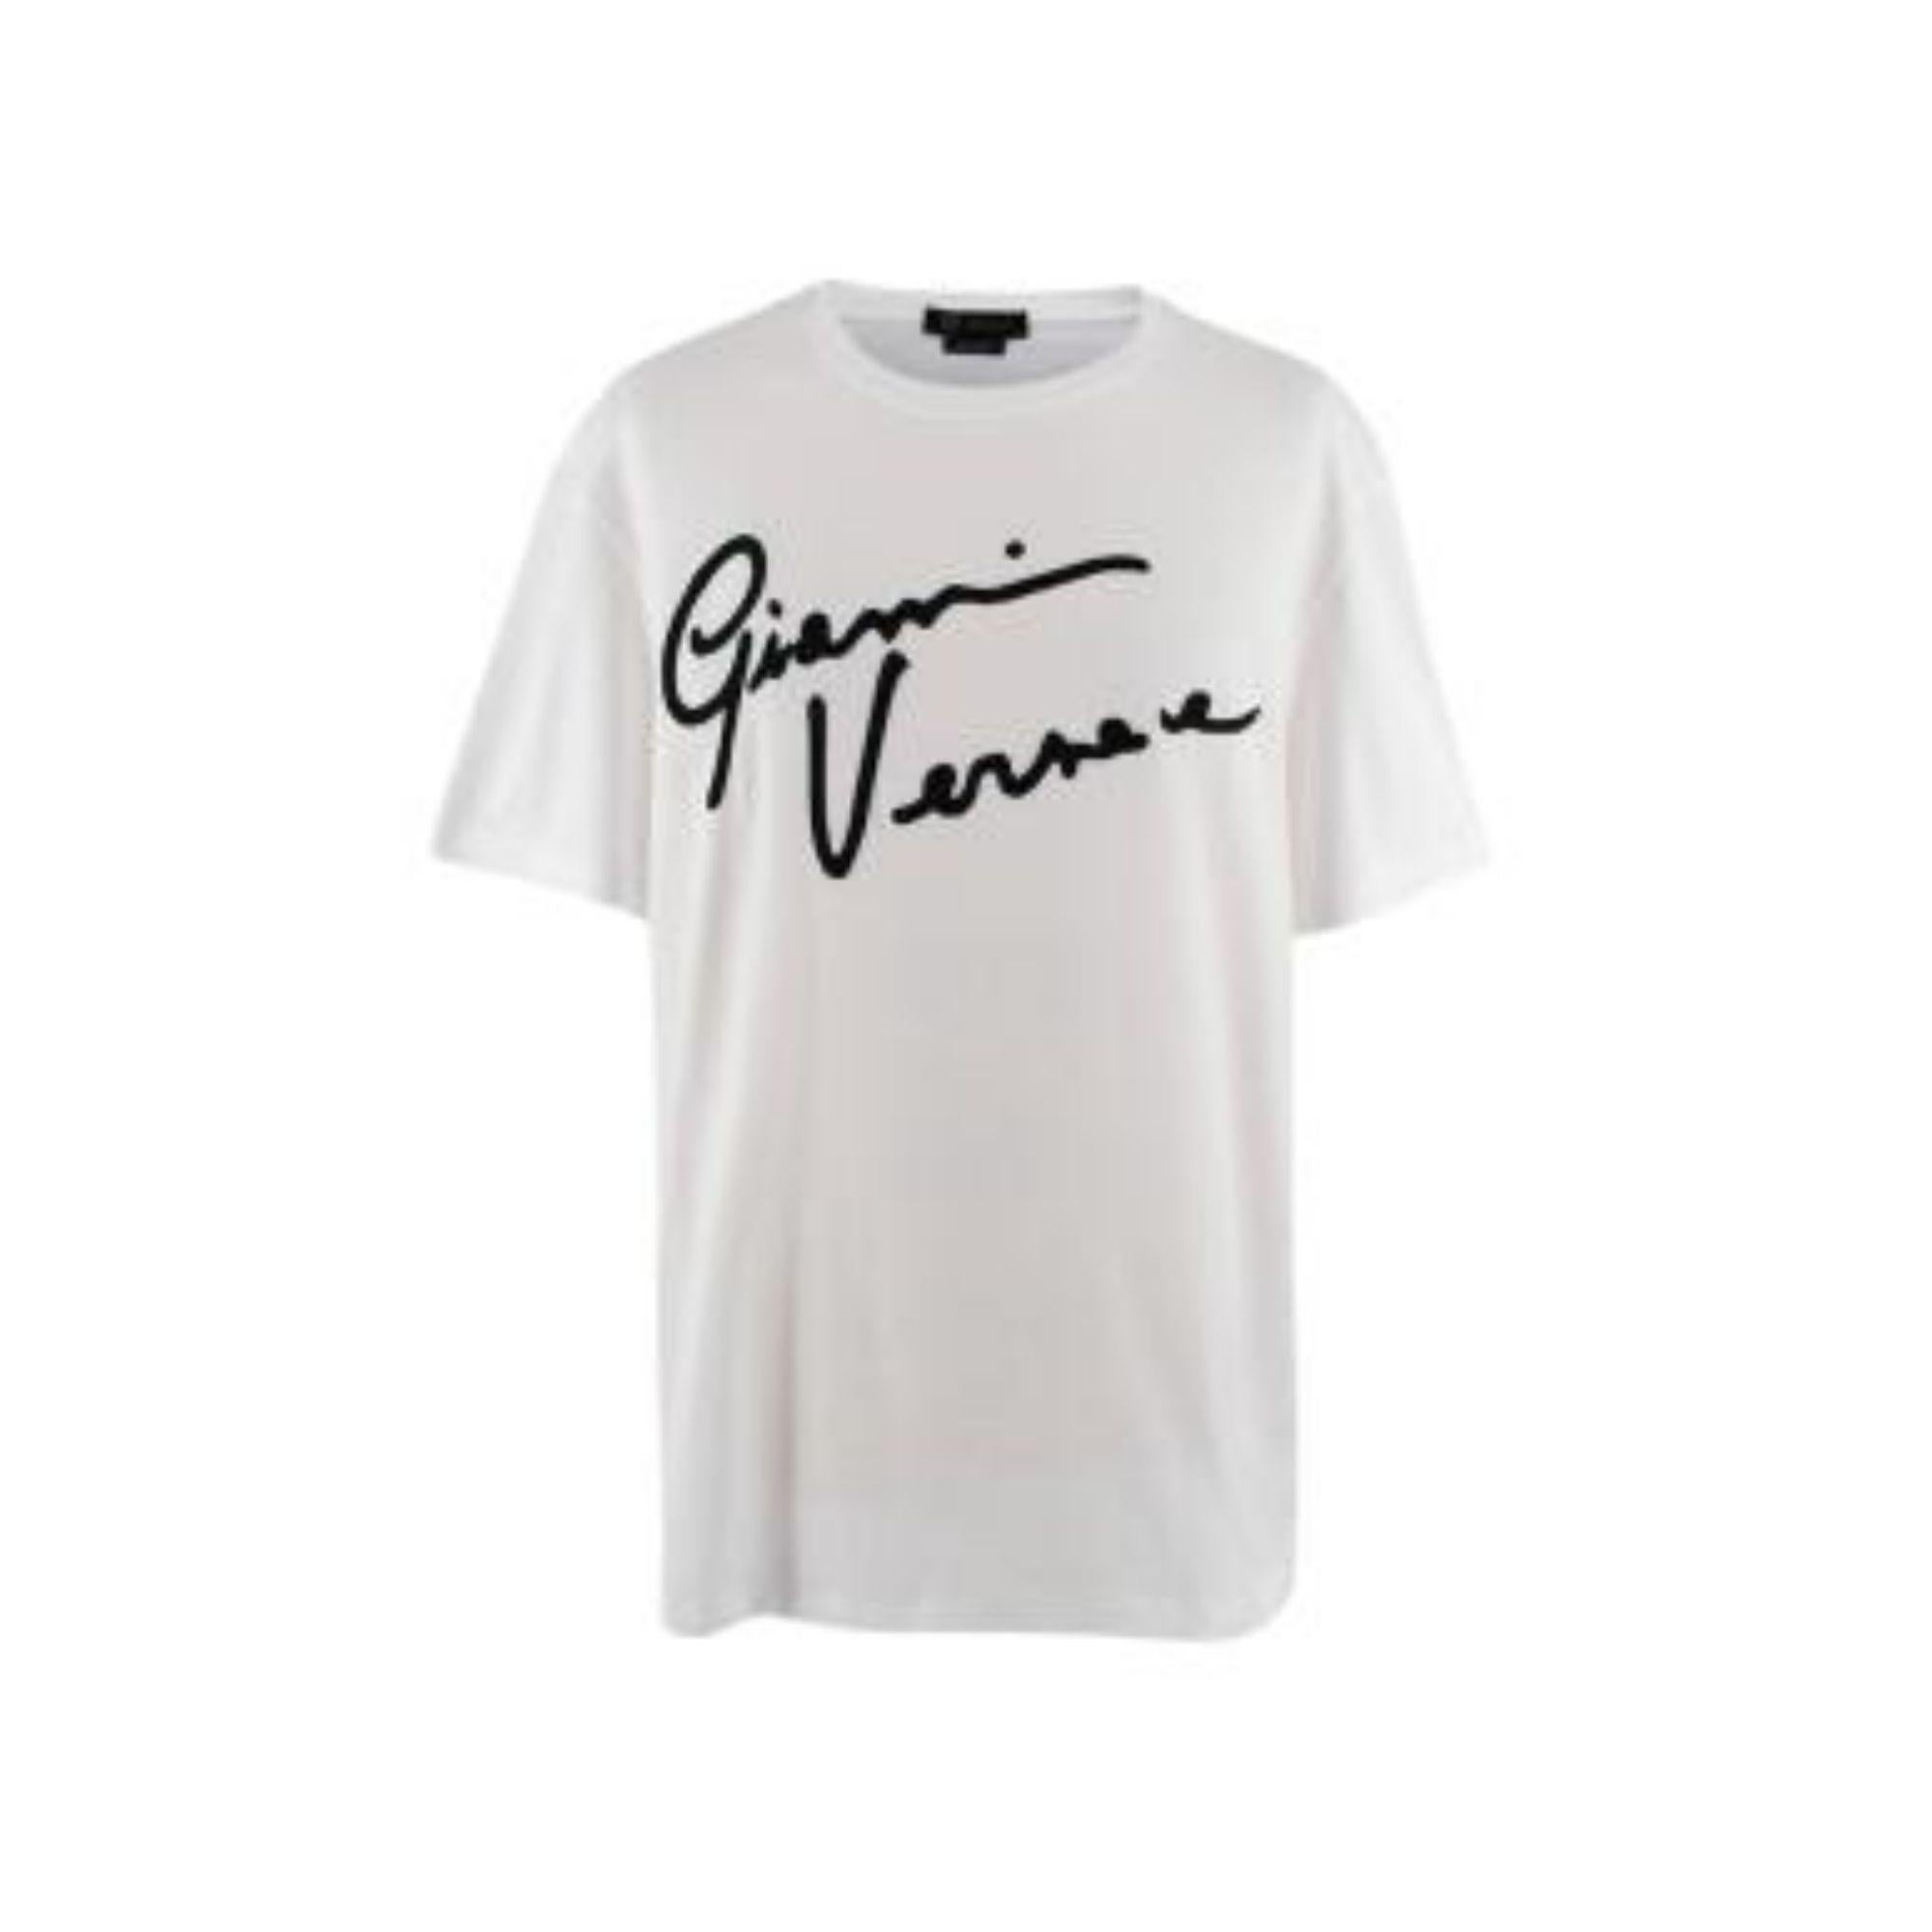 Versace White and Black Gianni Logo T-shirt

- Taylor fit
- Short sleeved
- Logo embroidery on chest
- Round neckline

Material
100% Cotton
Embroidery: 100% Wool

Made in Italy

PLEASE NOTE, THESE ITEMS ARE PRE-OWNED AND MAY SHOW SIGNS OF BEING